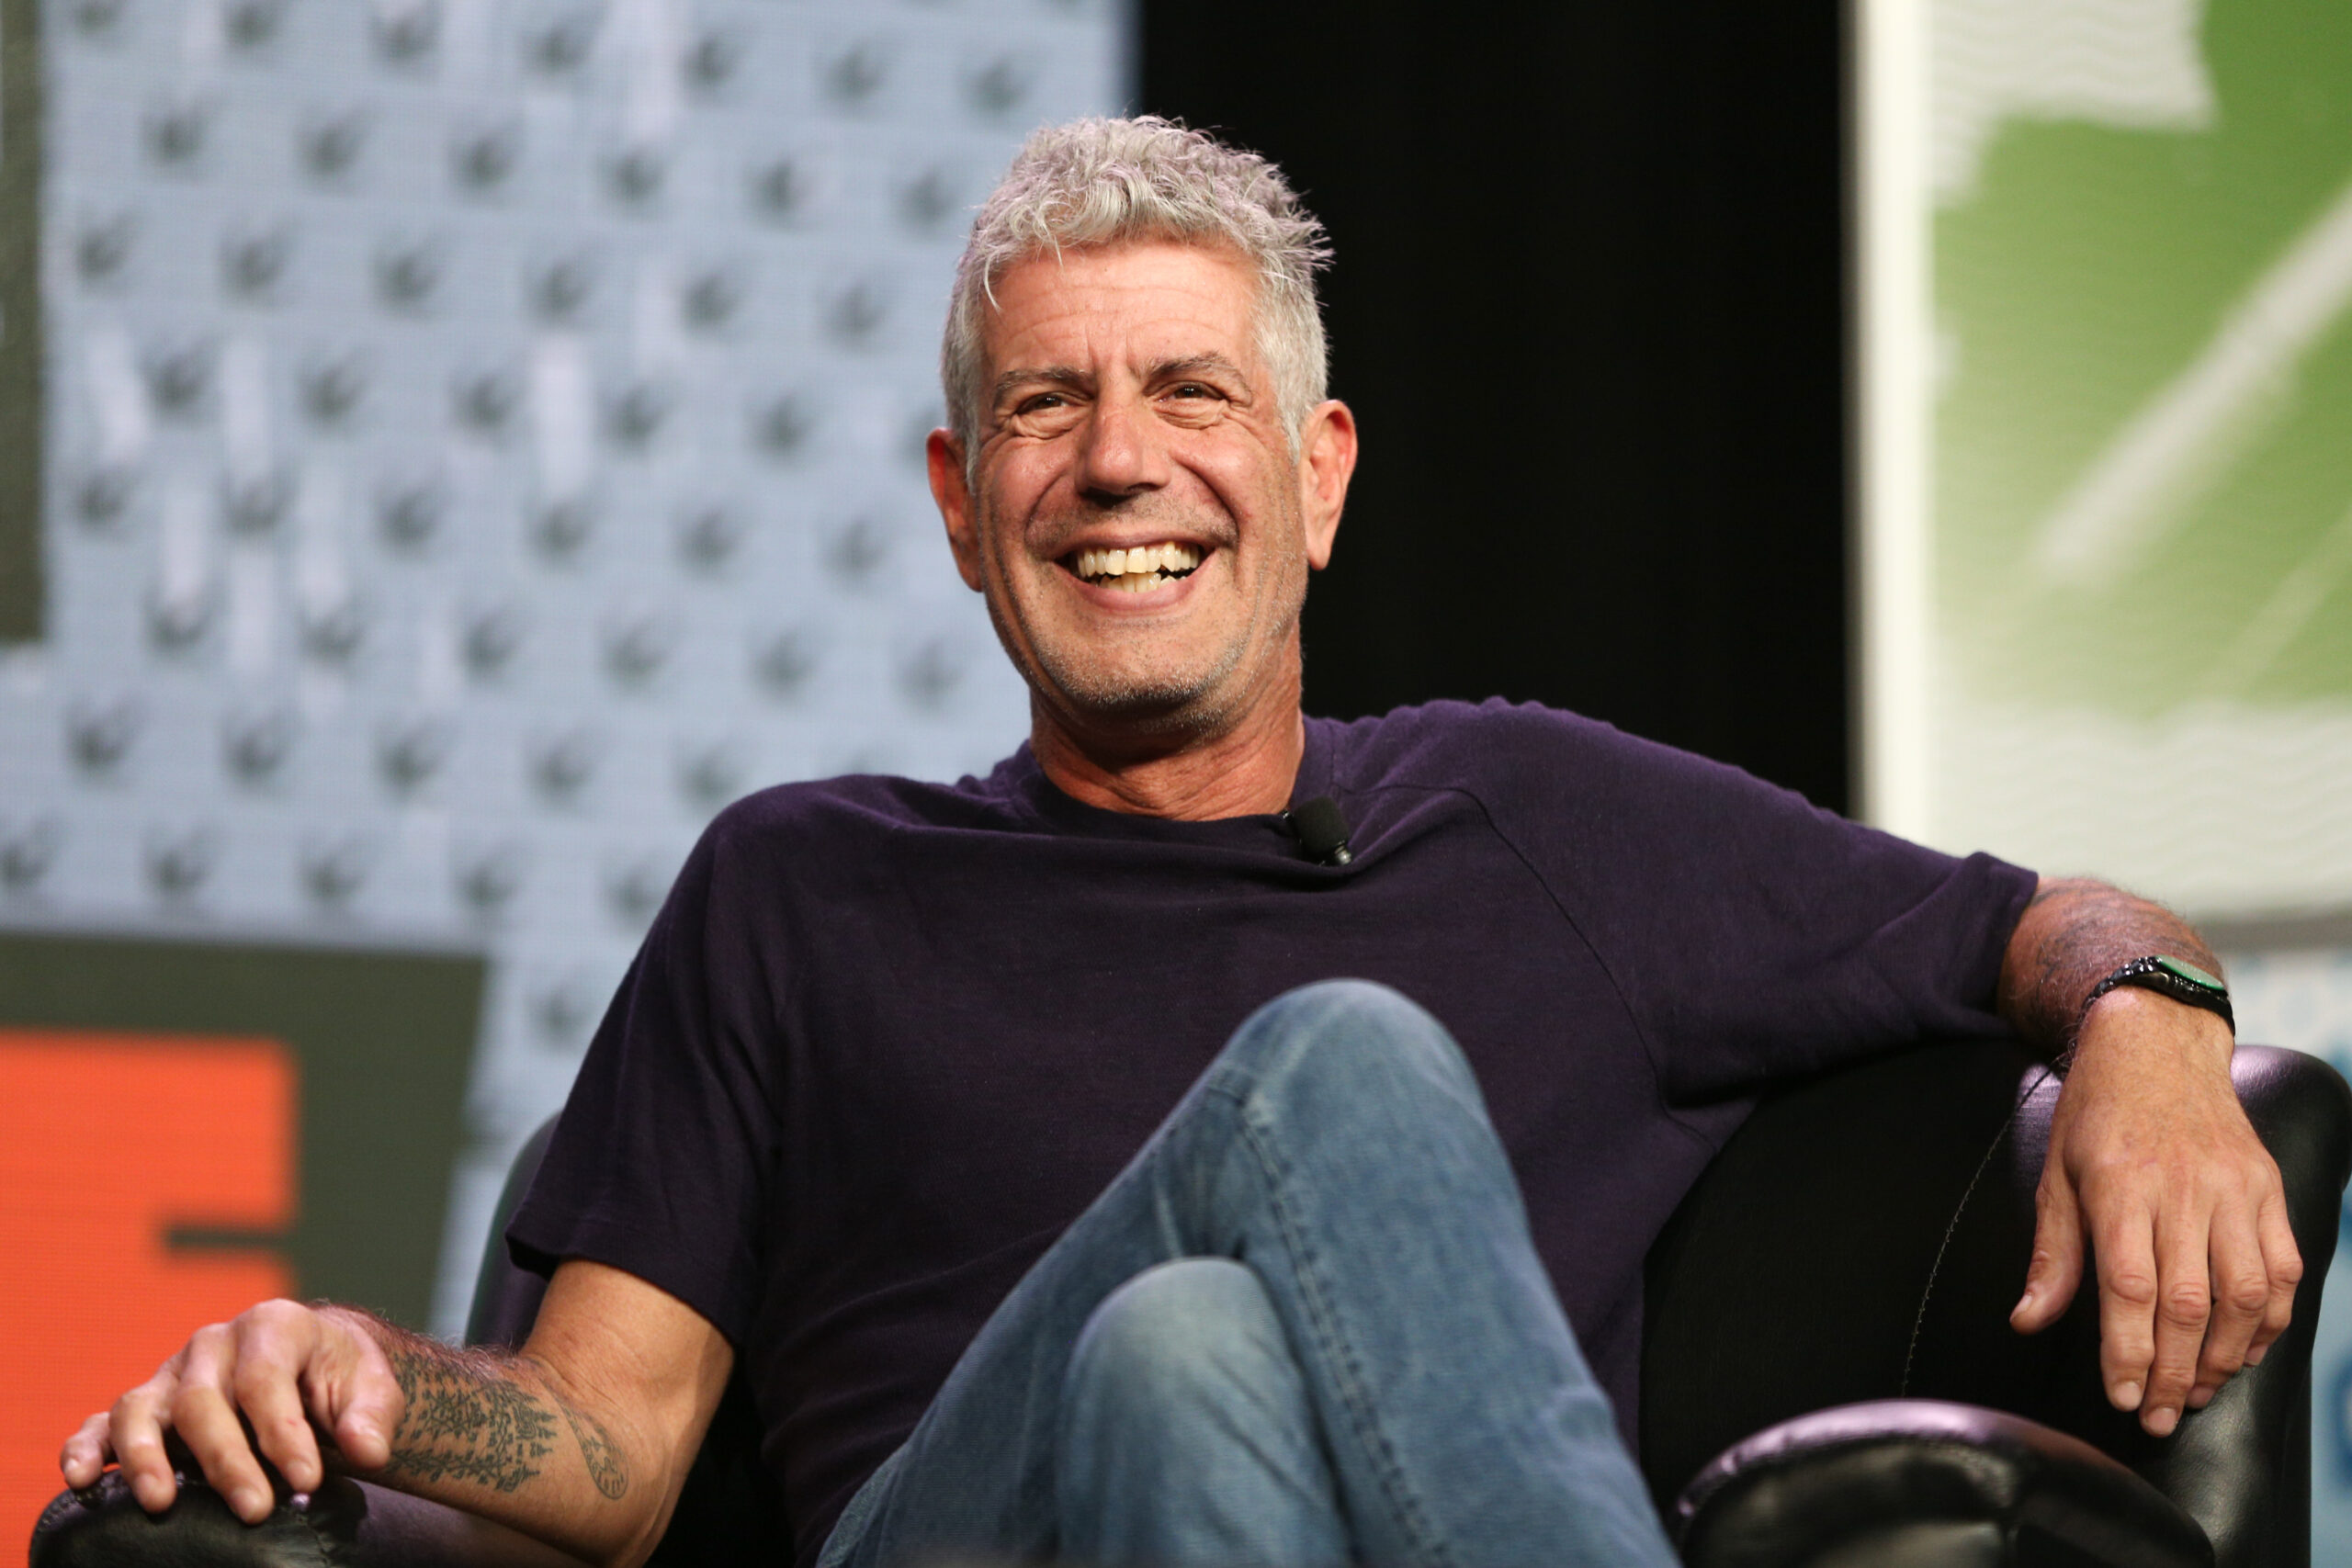 Anthony Bourdain speaks during South By Southwest